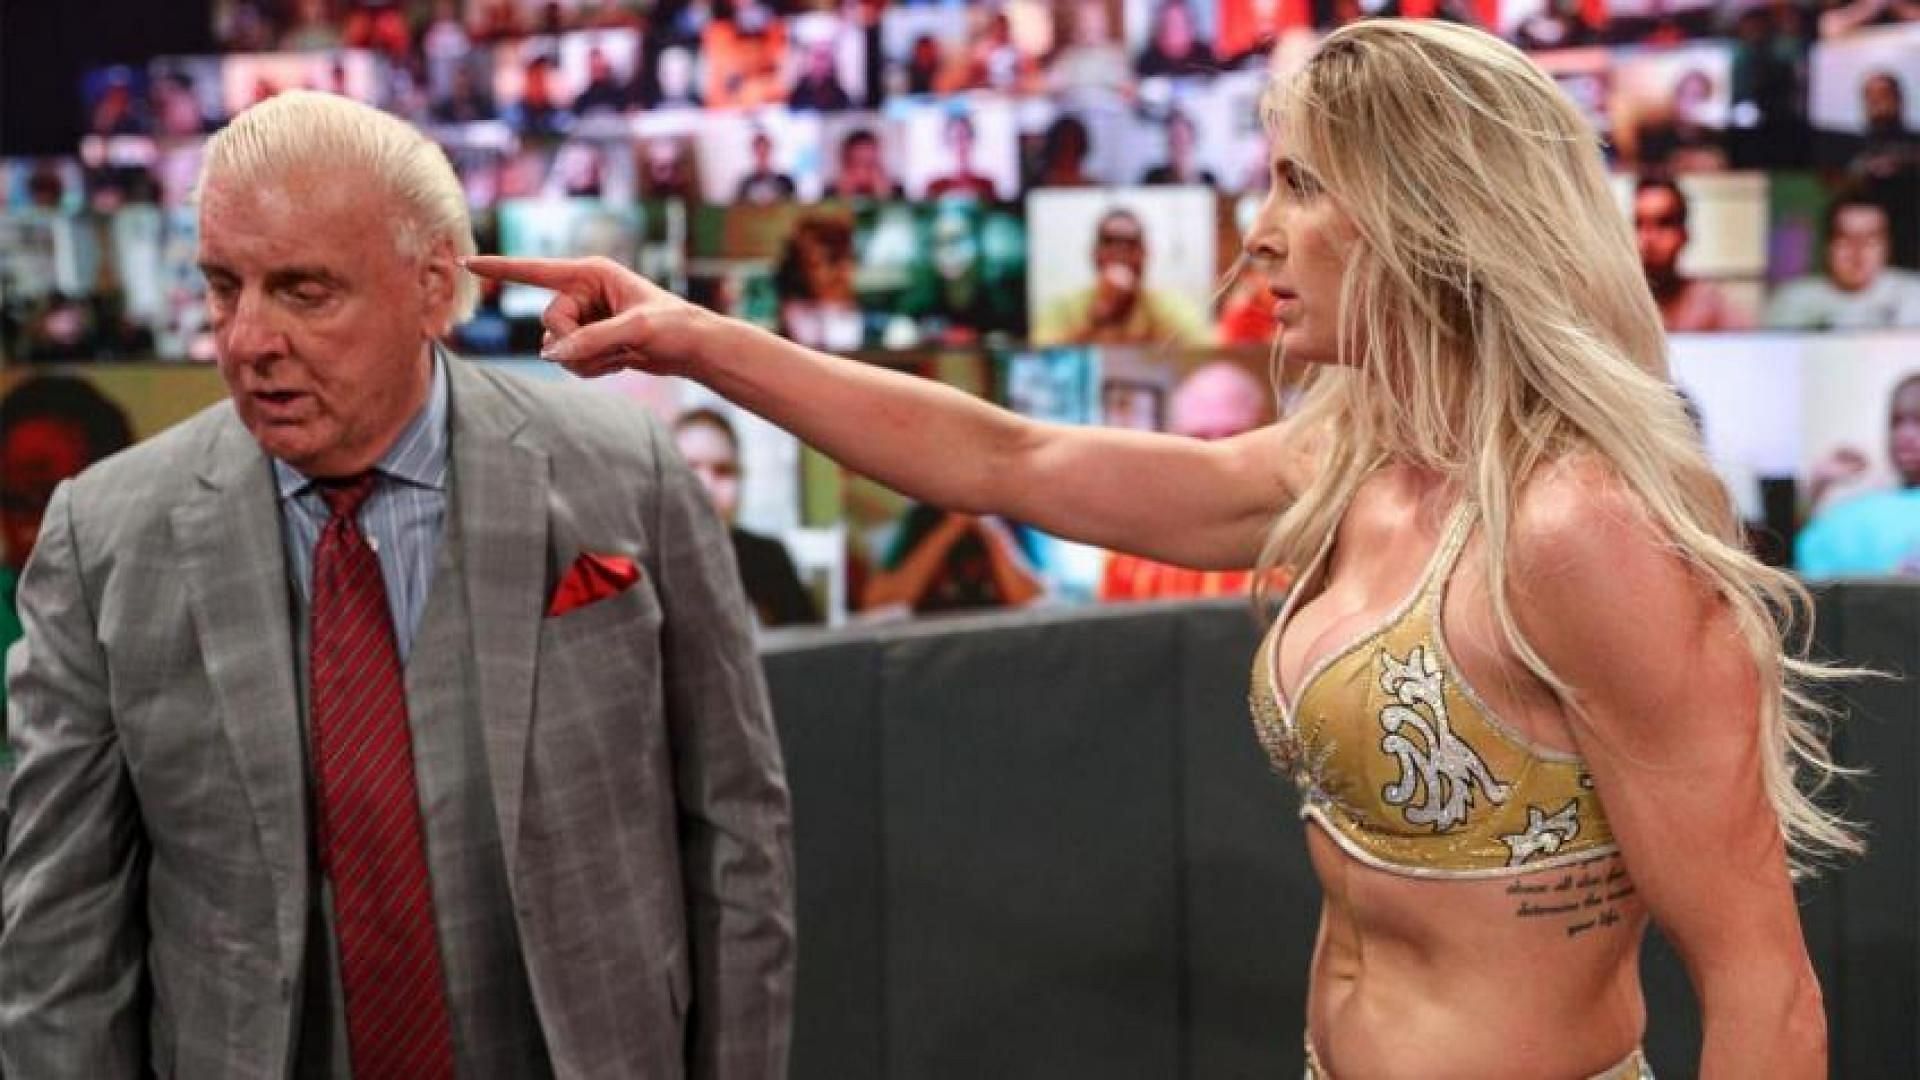 Charlotte Flair has commented on the working relationship with her father.